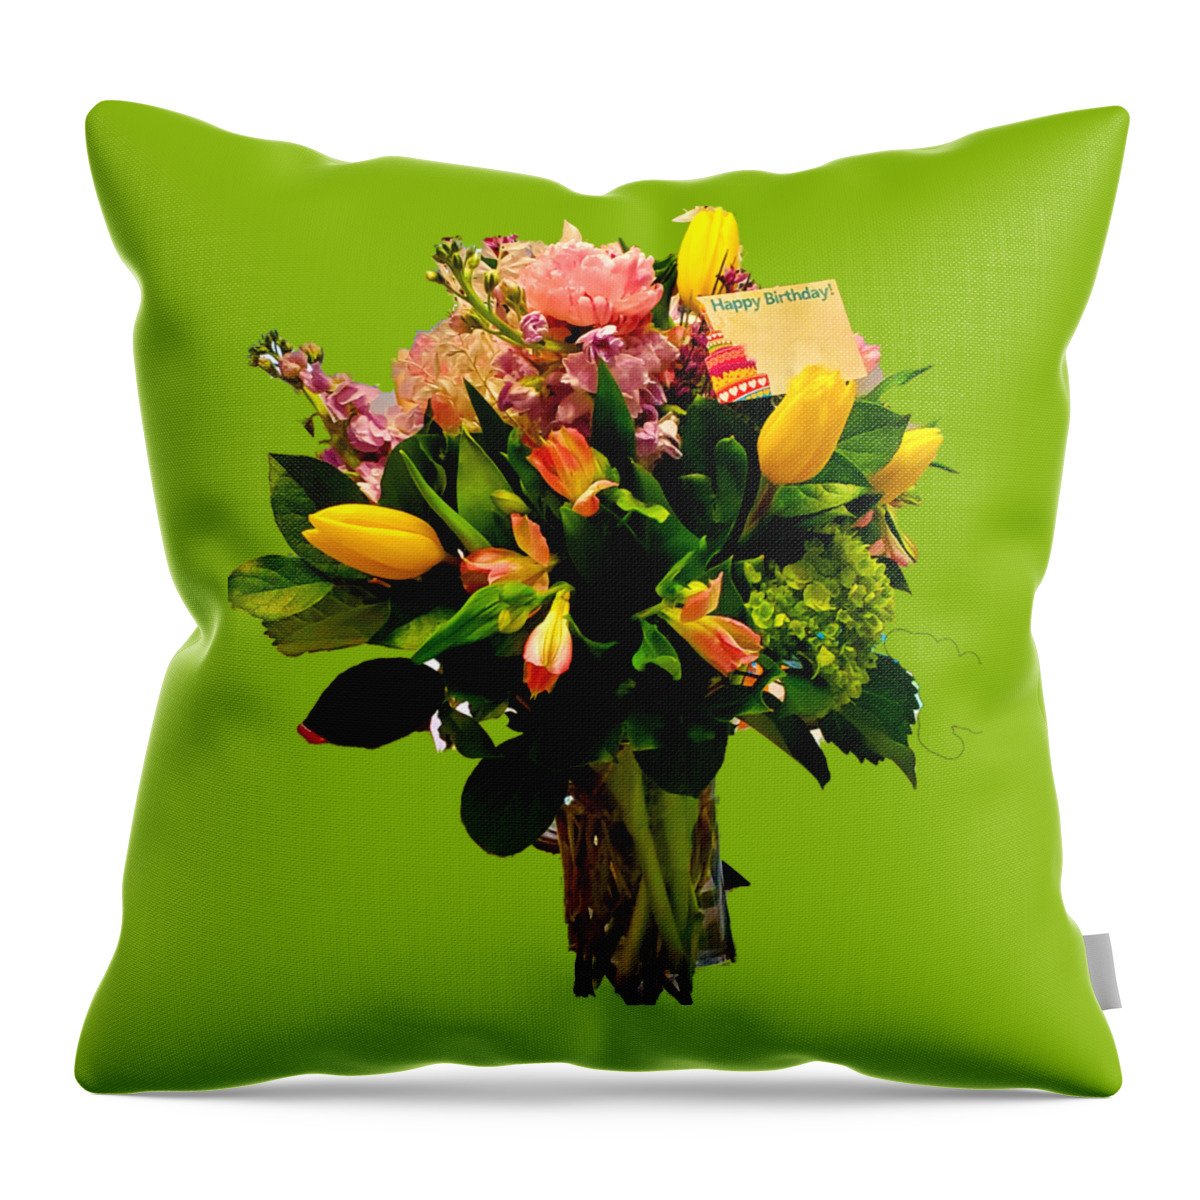 Floral Throw Pillow featuring the photograph Happy Birthday Bouquet by Stacie Siemsen